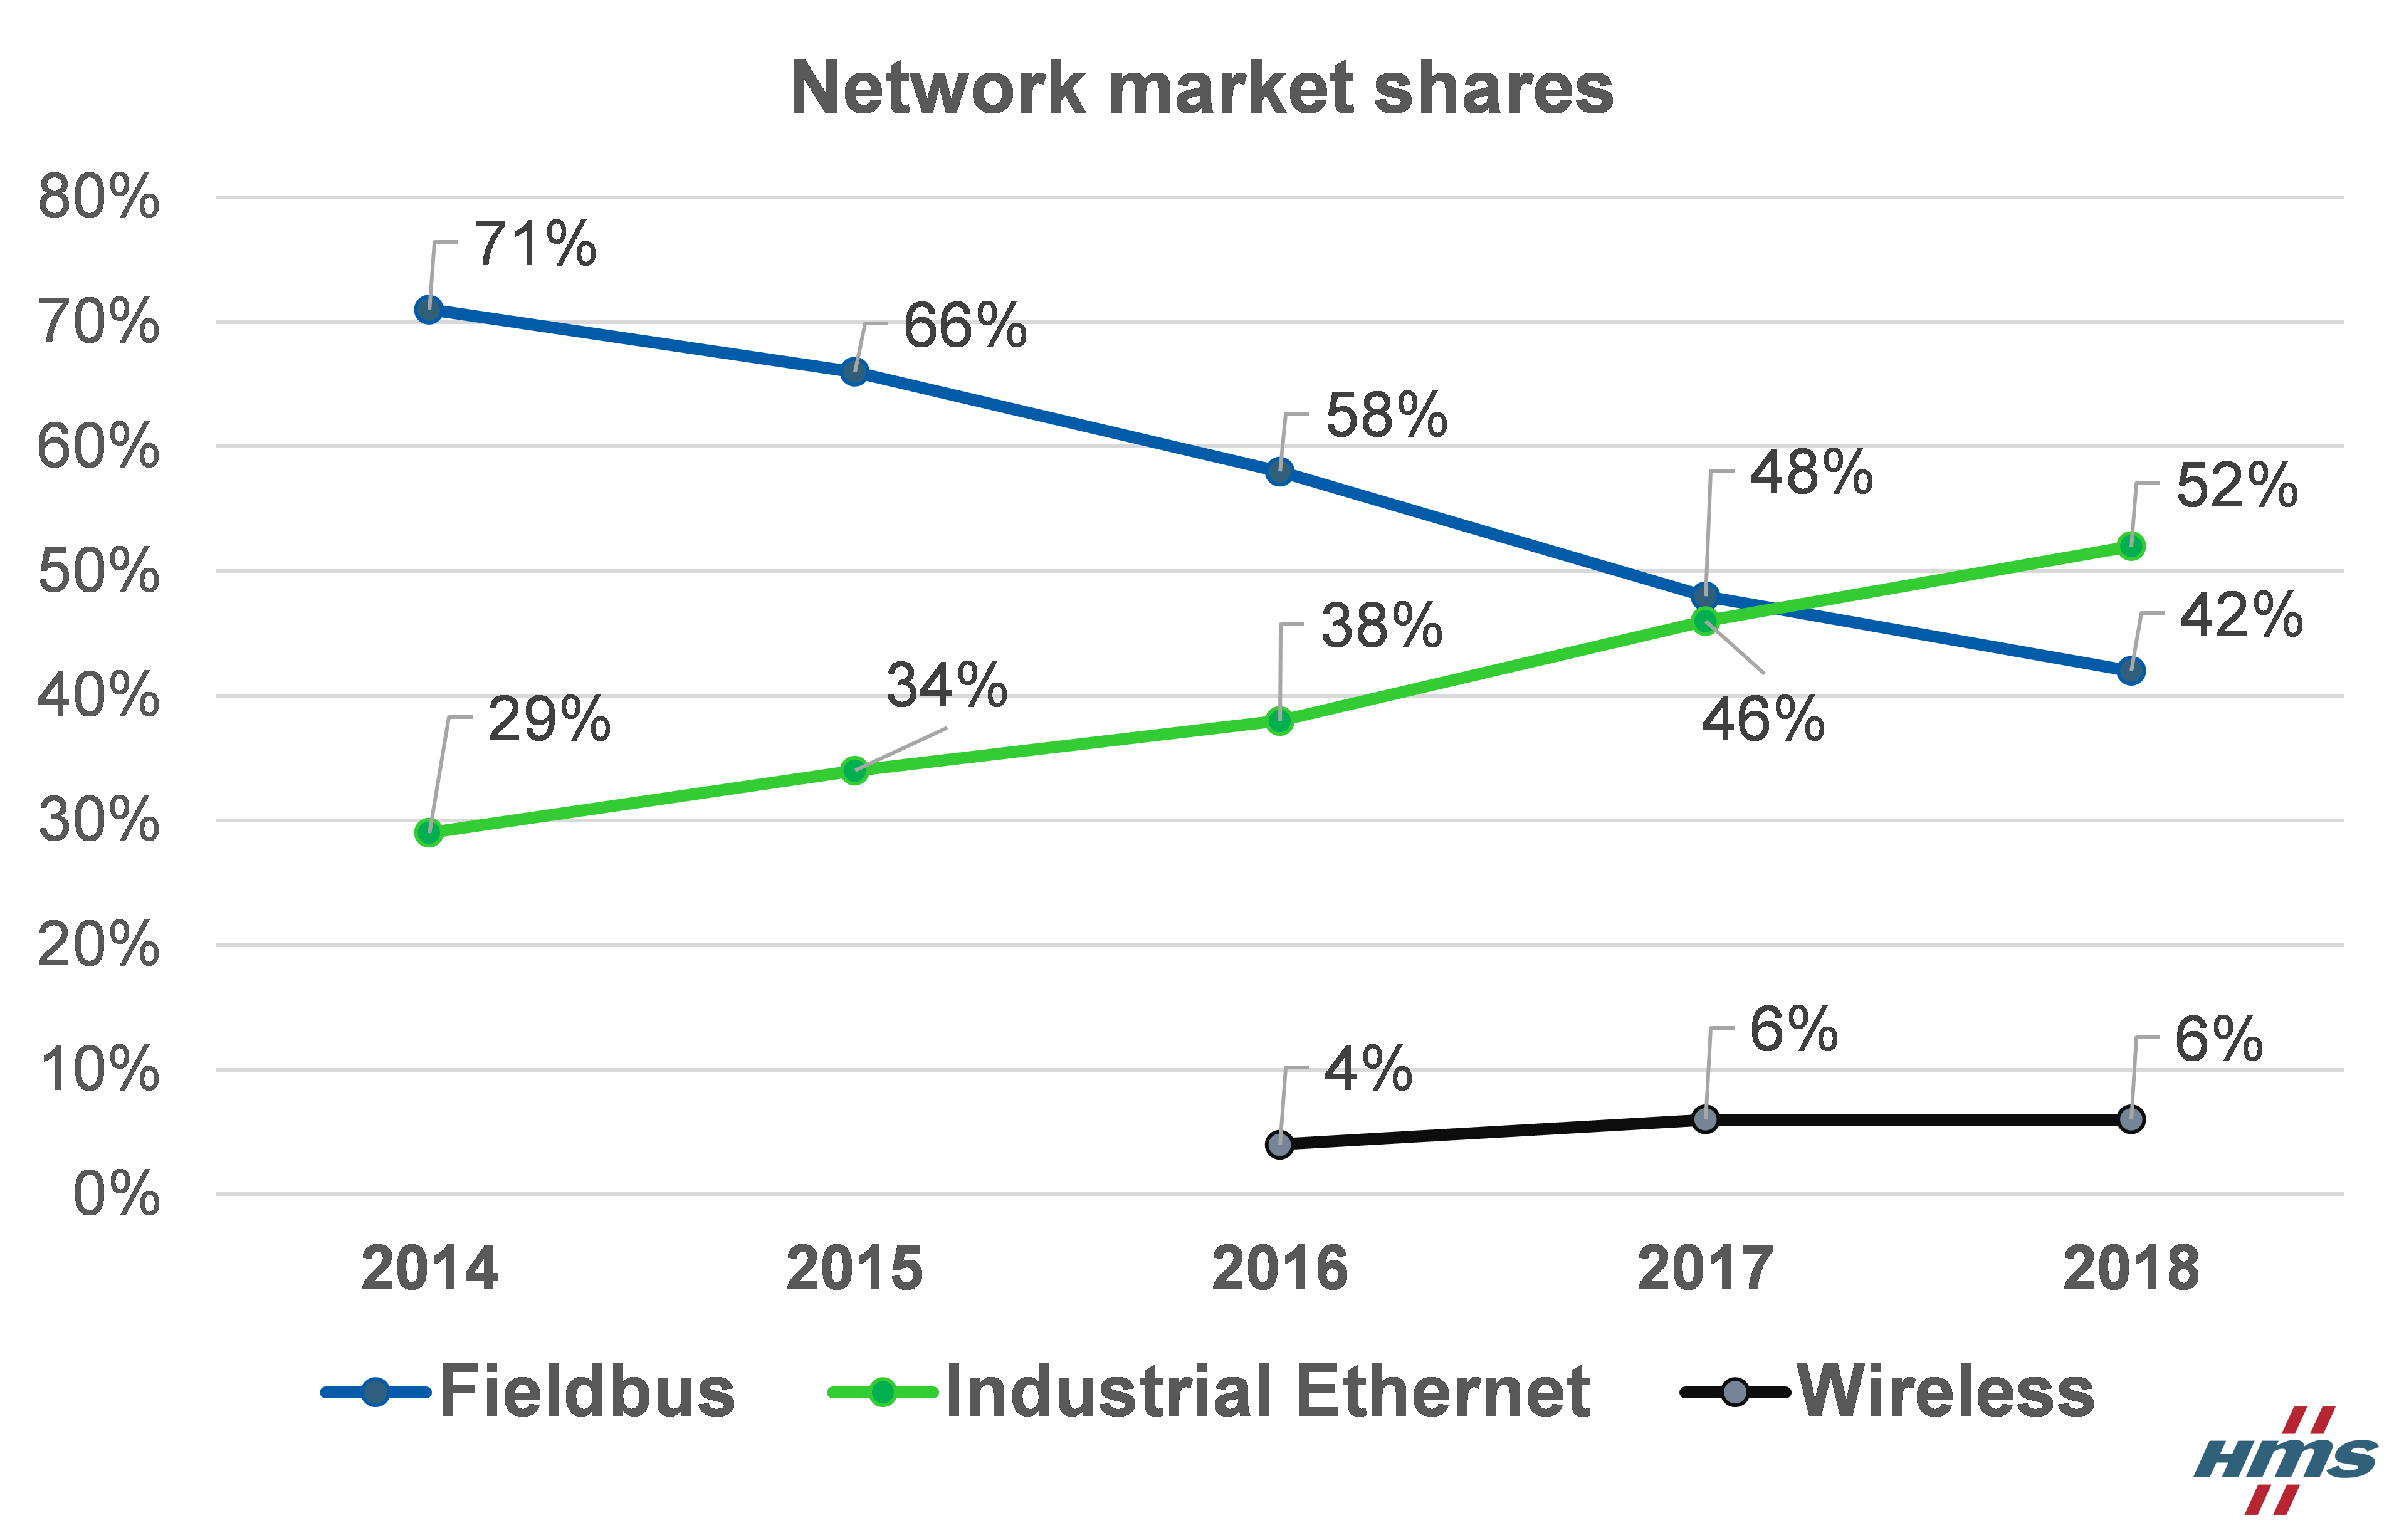 evolution-of-fieldbus-and-industrial-ethernet-market-shares-new-nodes.png